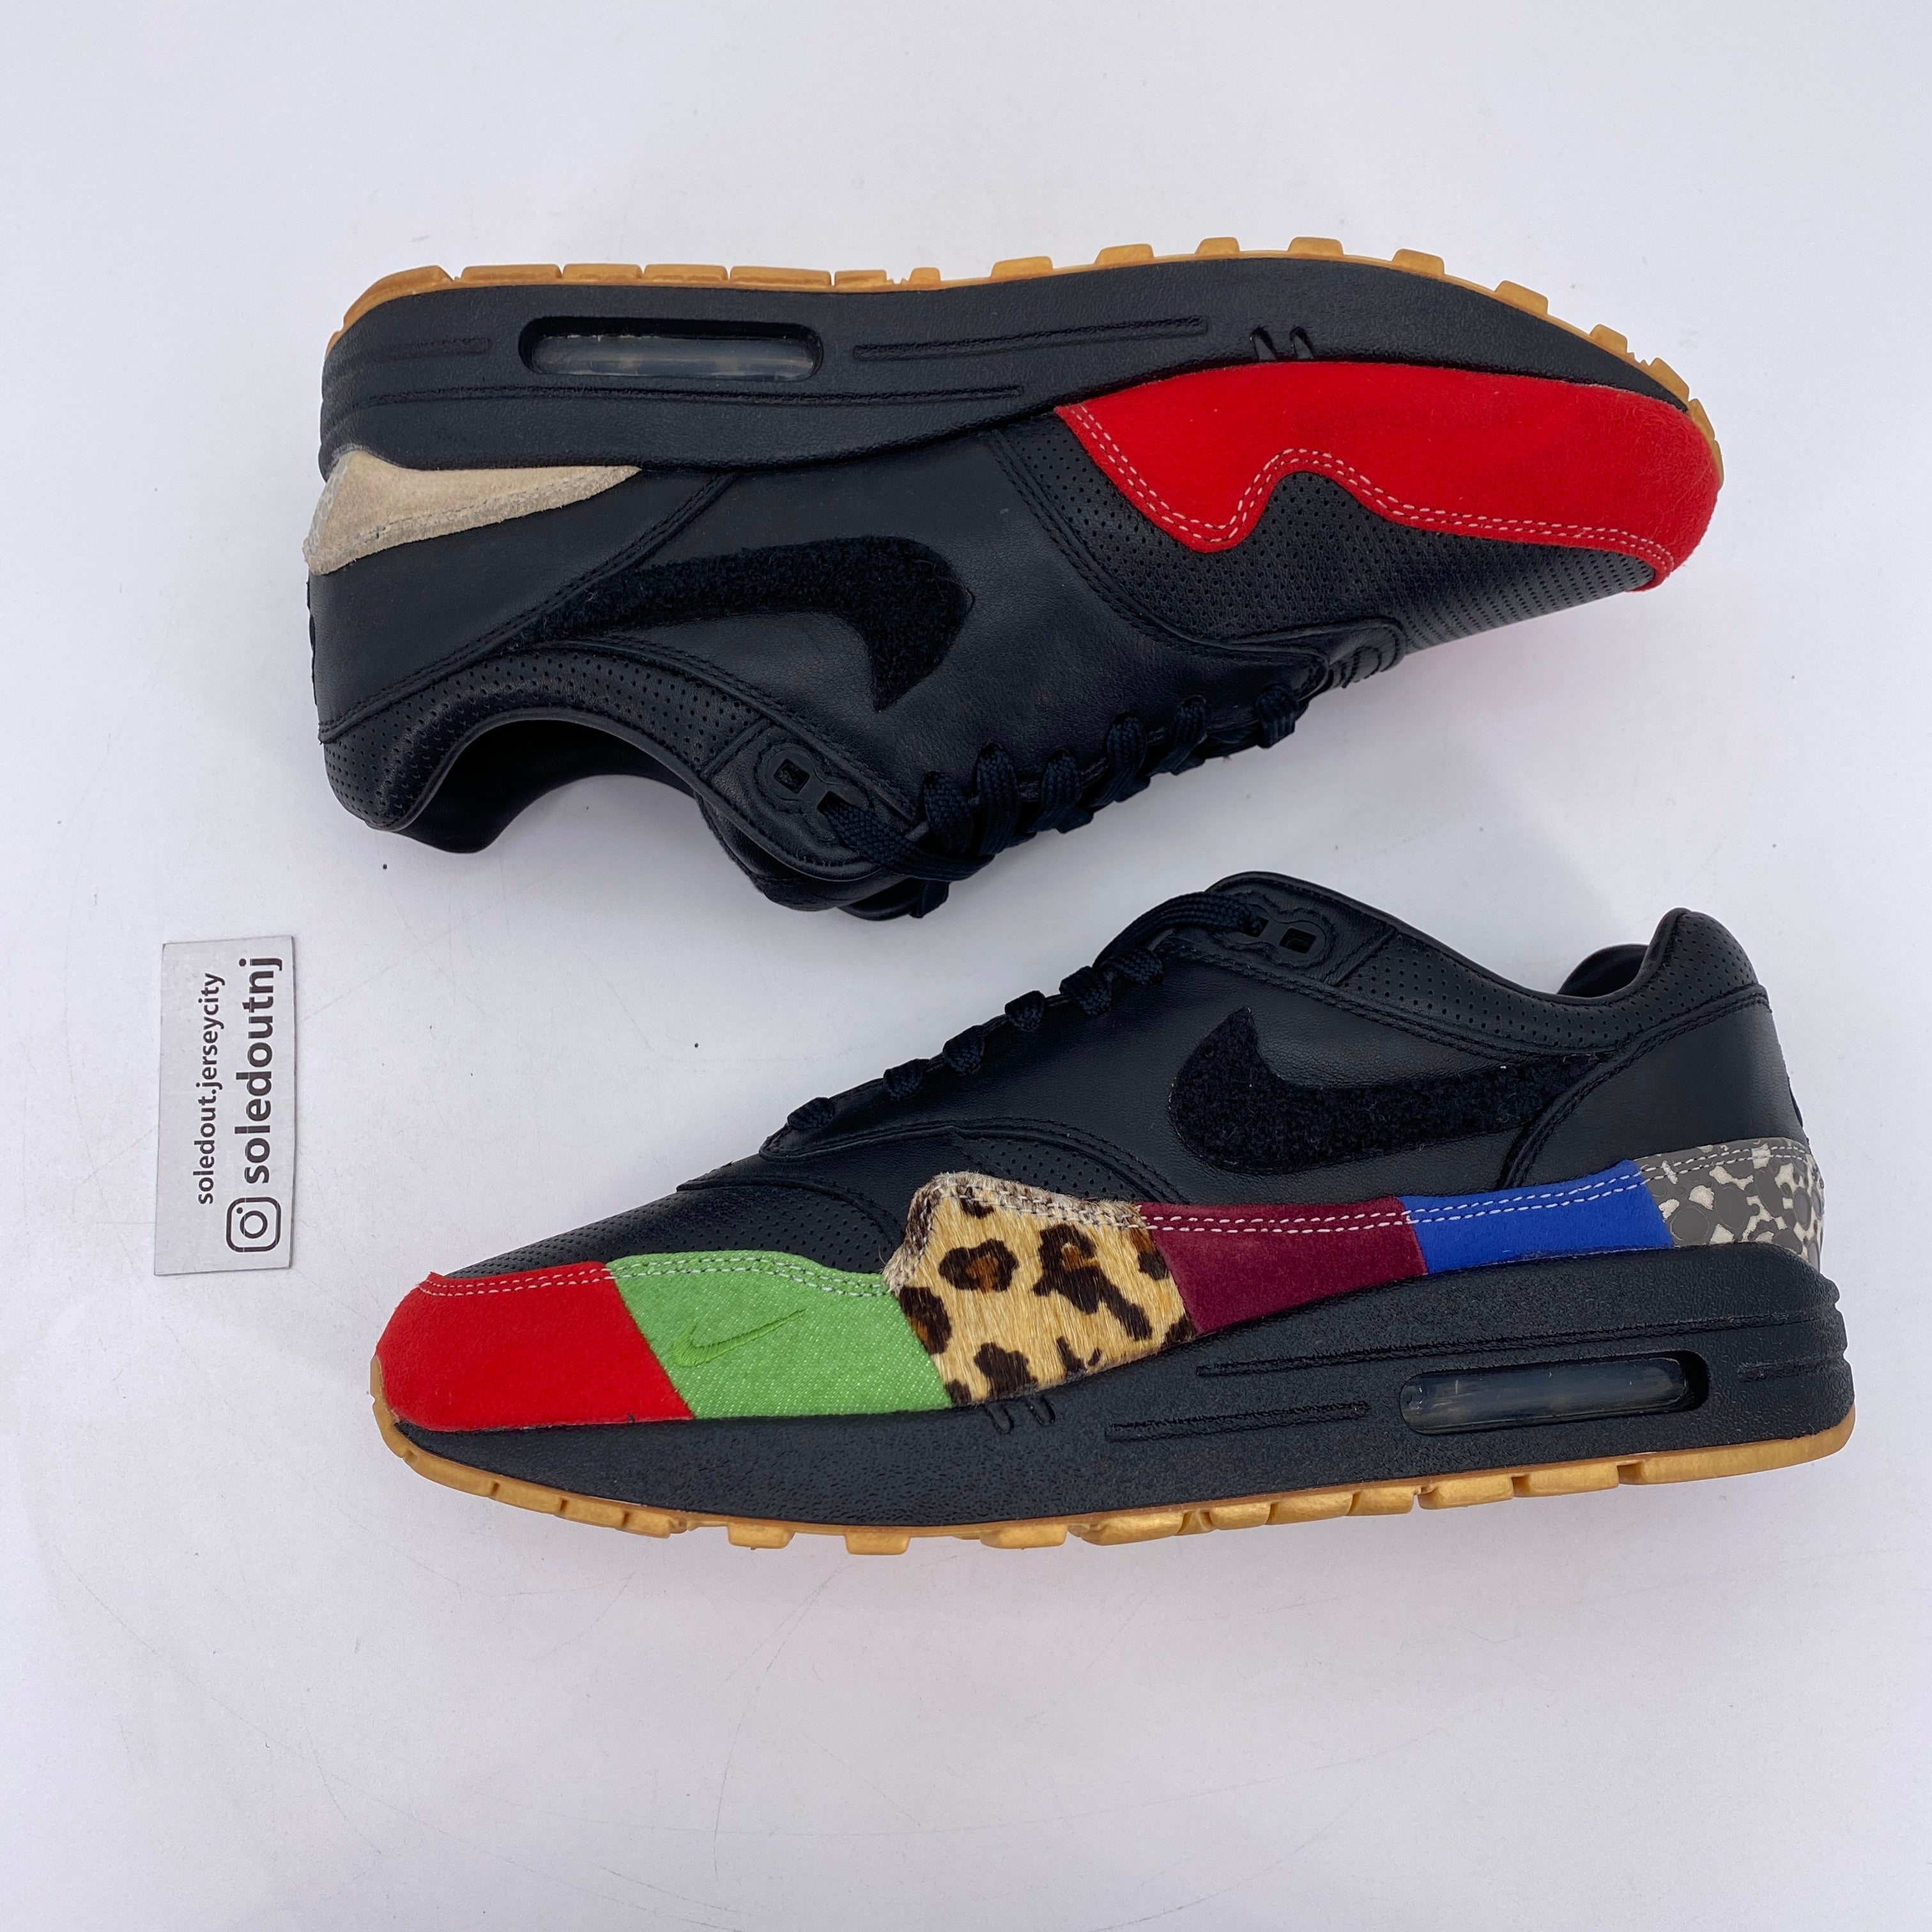 Nike Air Max 1 "Master" 2017 Used Size 7.5